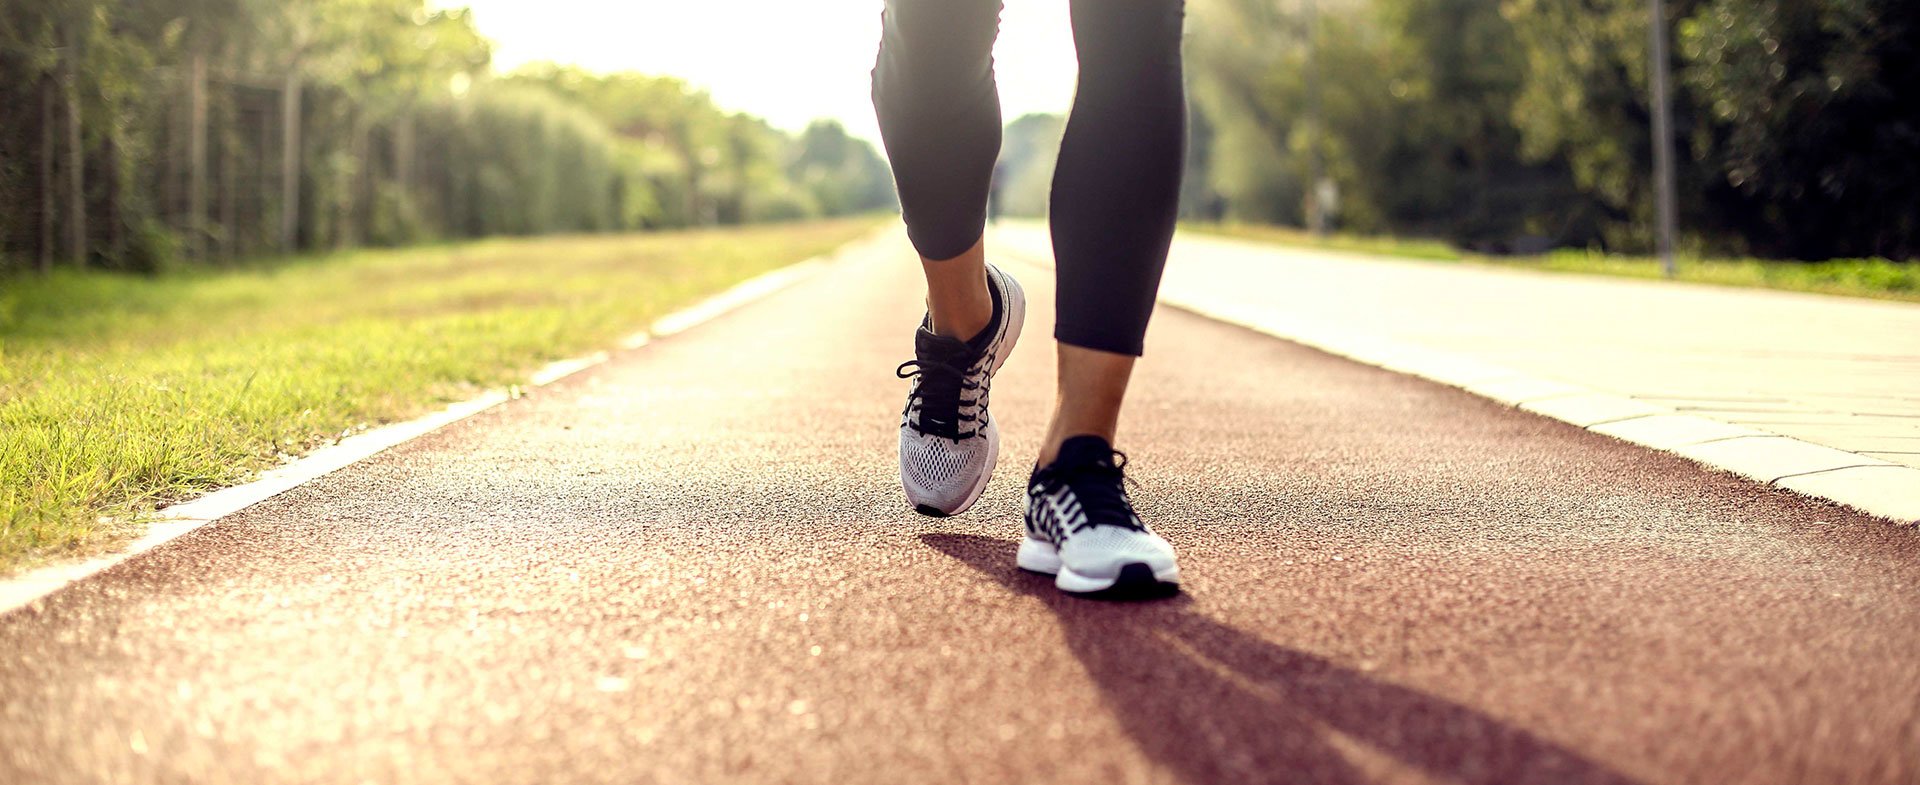 Walking: What It Is, Health Benefits, and Getting Started